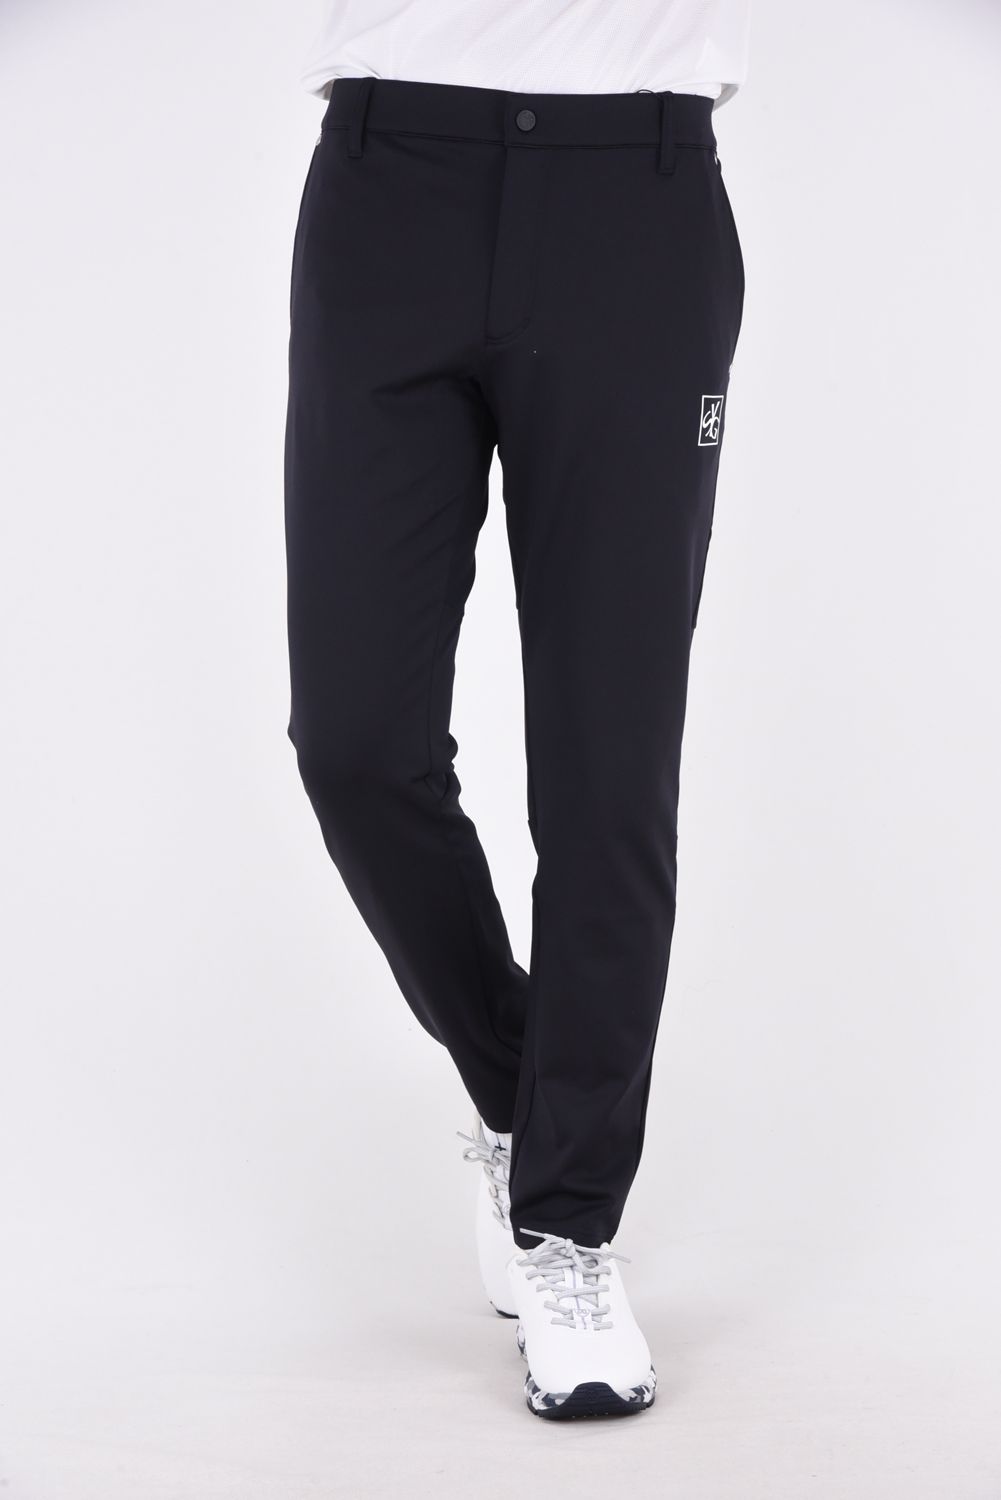 SY32 by SWEET YEARS GOLF - 【ABSOLUTE】 Carvico SWEAT PANEL PANTS